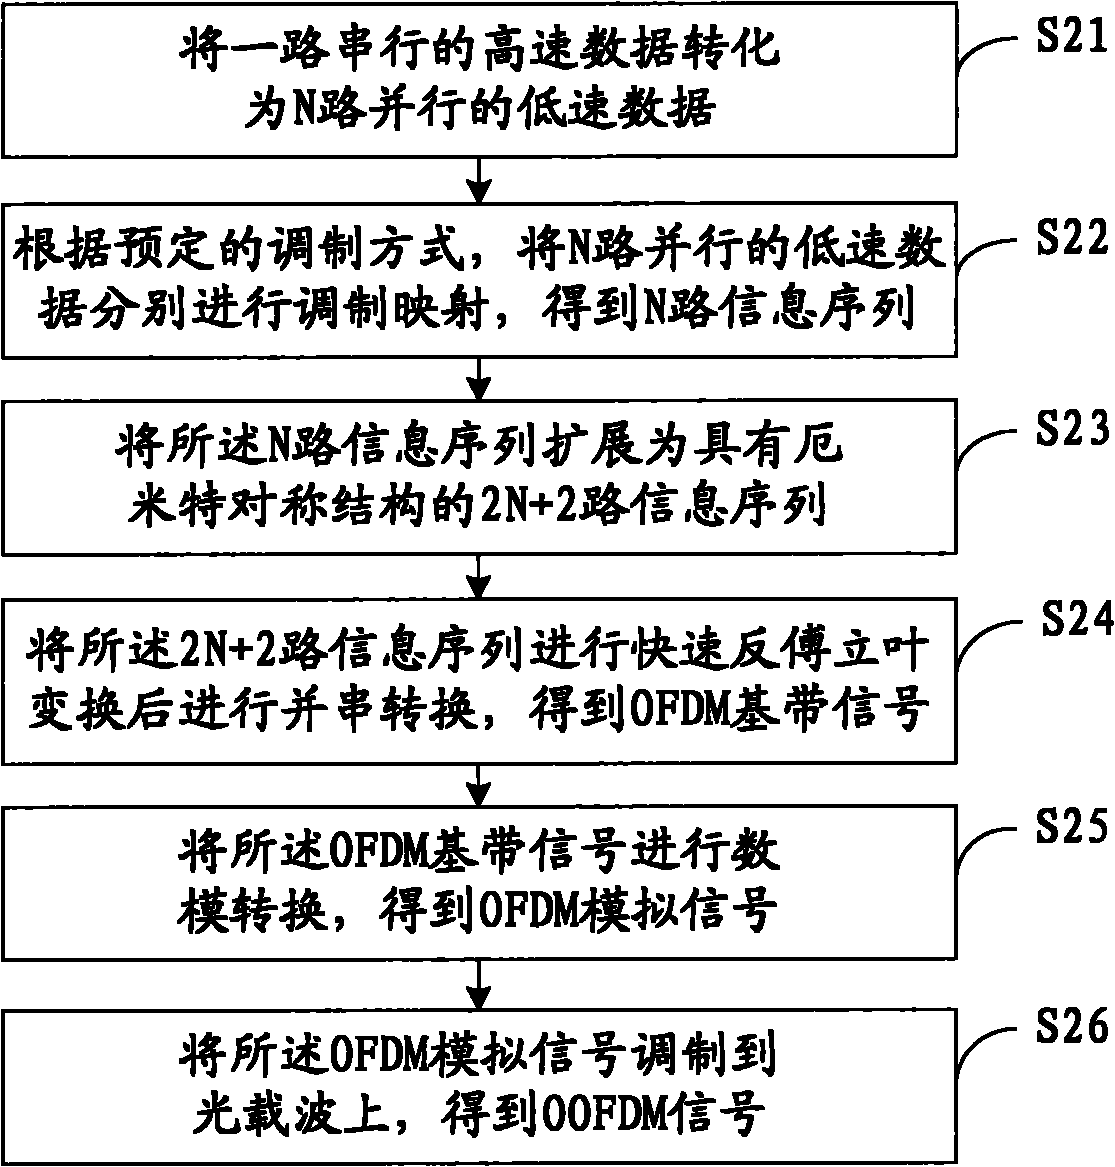 Method and device for generating and receiving OOFDM (Orthogonal Frequency Division Multiplexing) signal and wavelength division multiplexing system